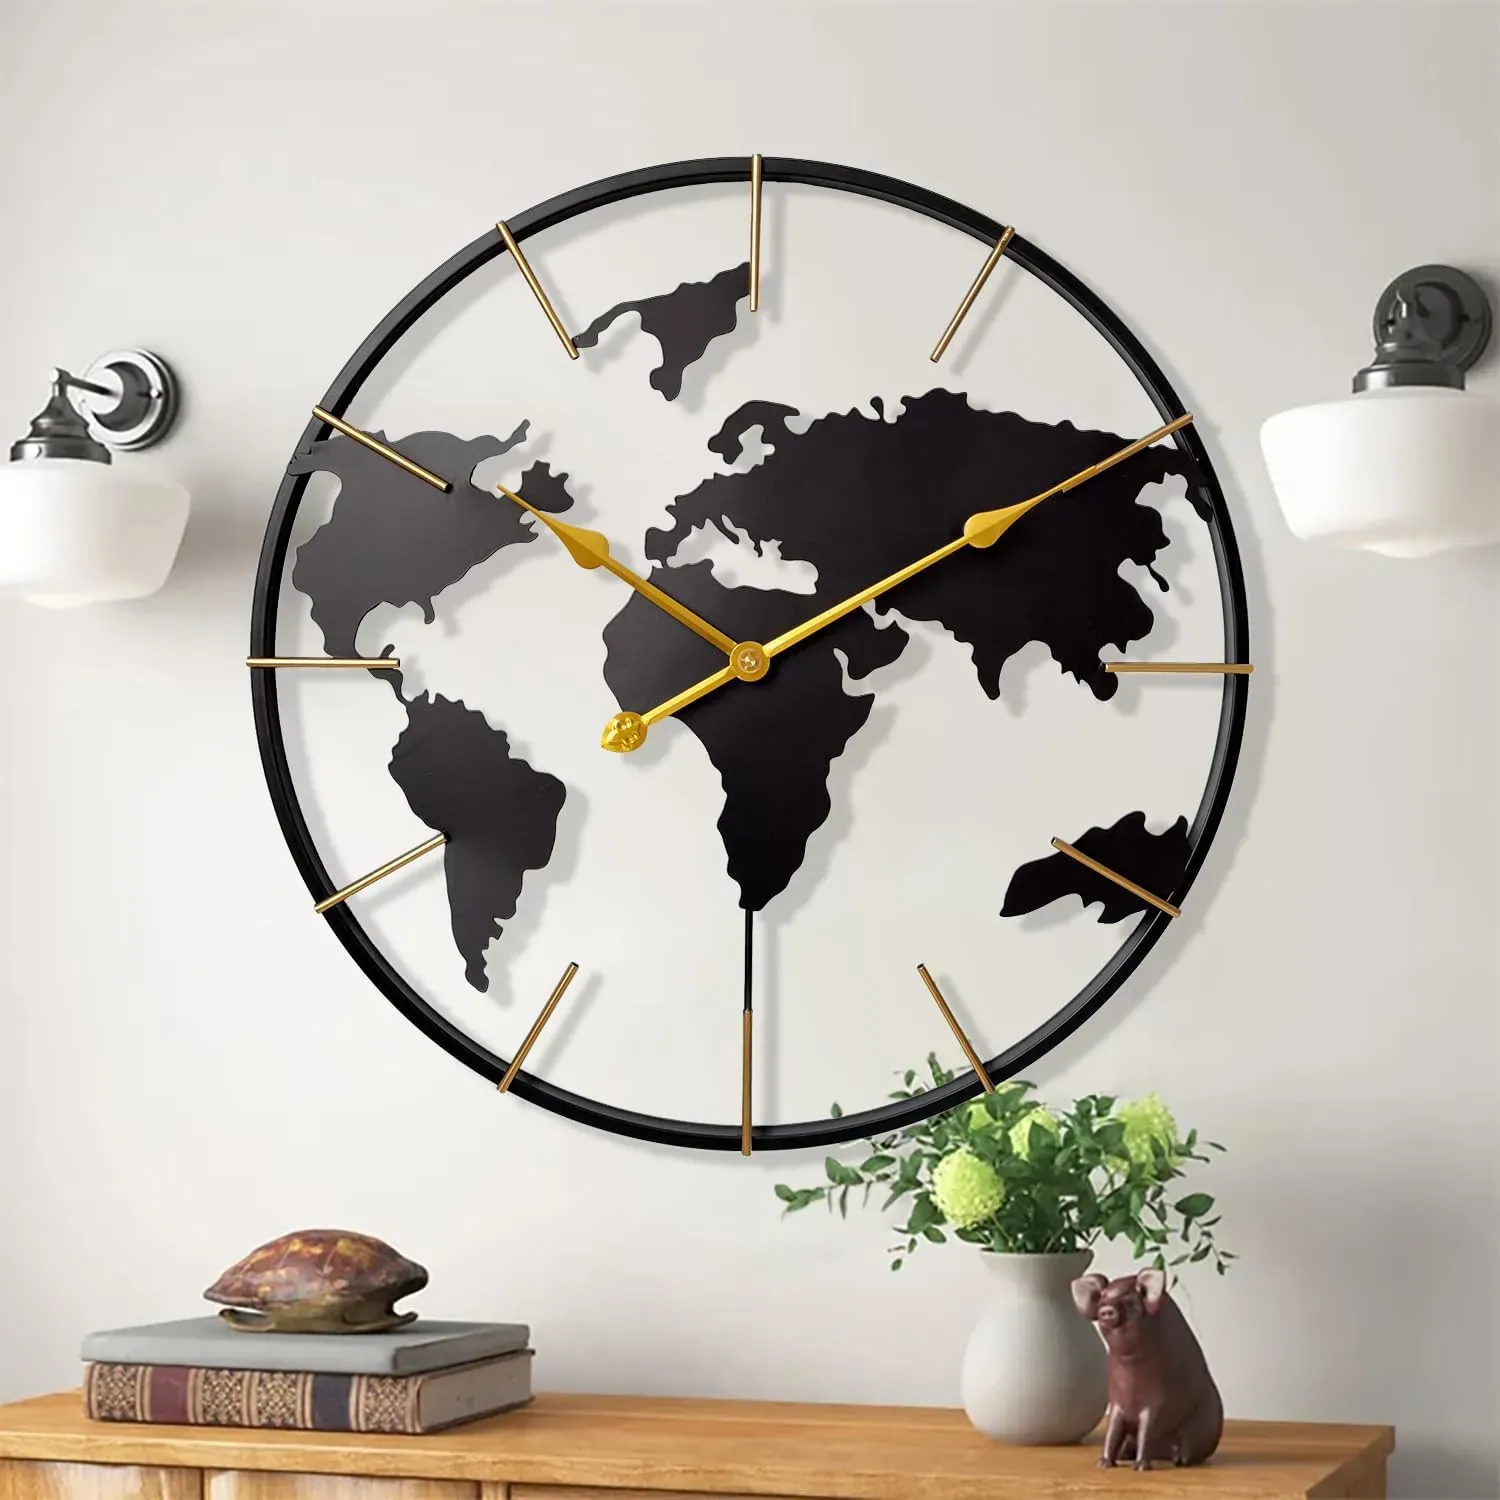 Clocks Large World Map Wall Clock, Metal Minimalist Modern Clock,Round Silent NonTicking Battery Operated Wall Clocks for Living Room/Ho